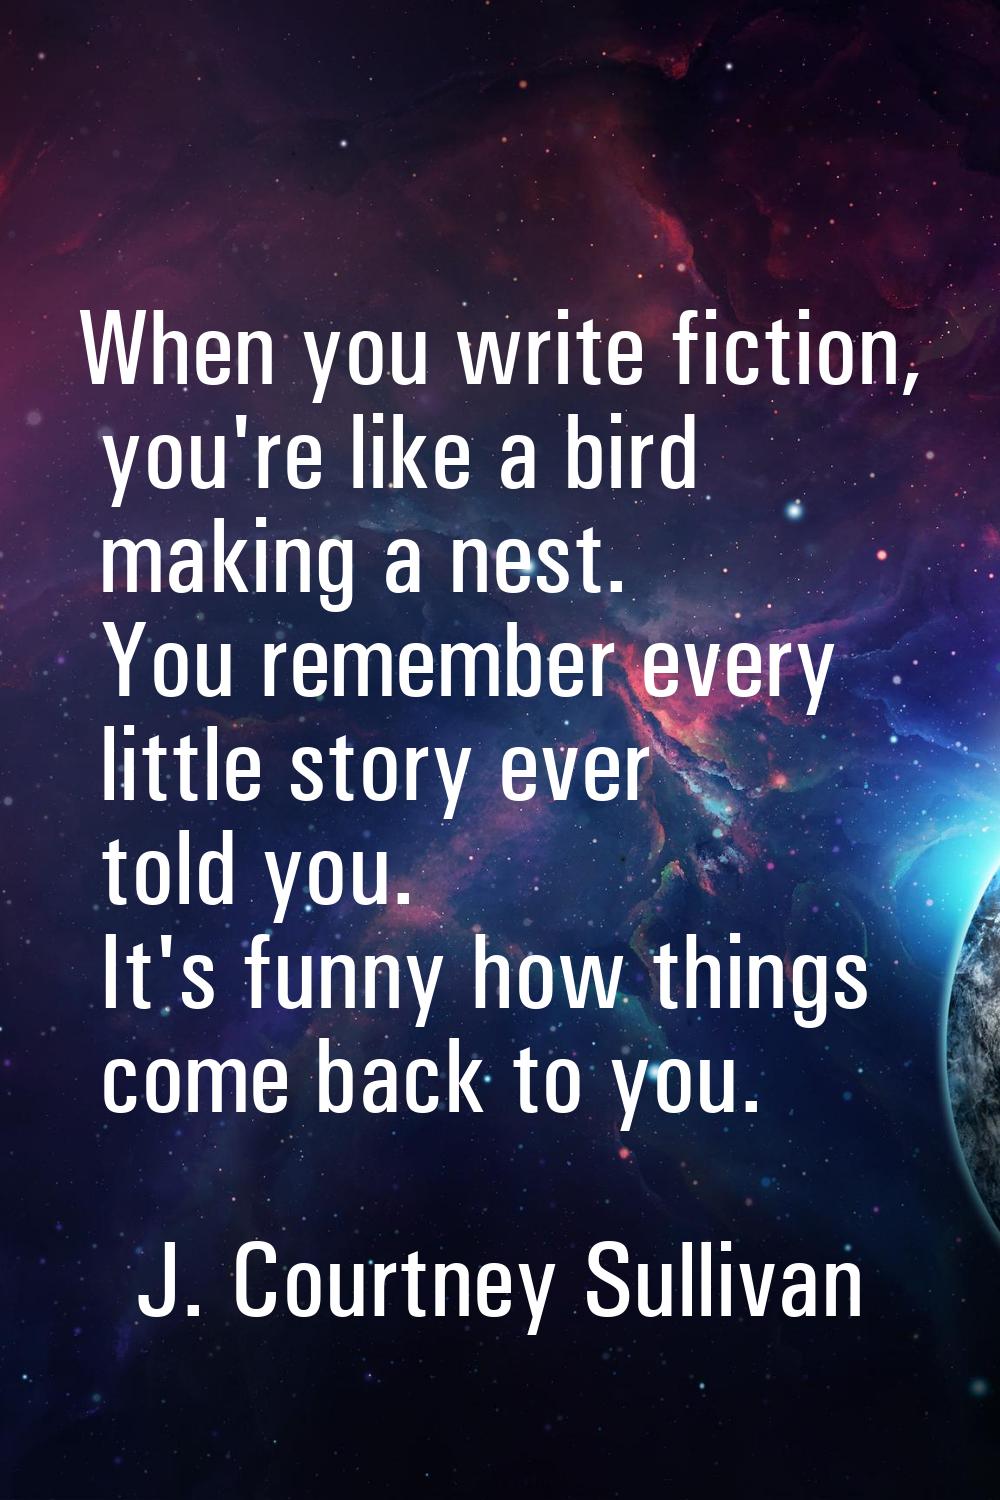 When you write fiction, you're like a bird making a nest. You remember every little story ever told